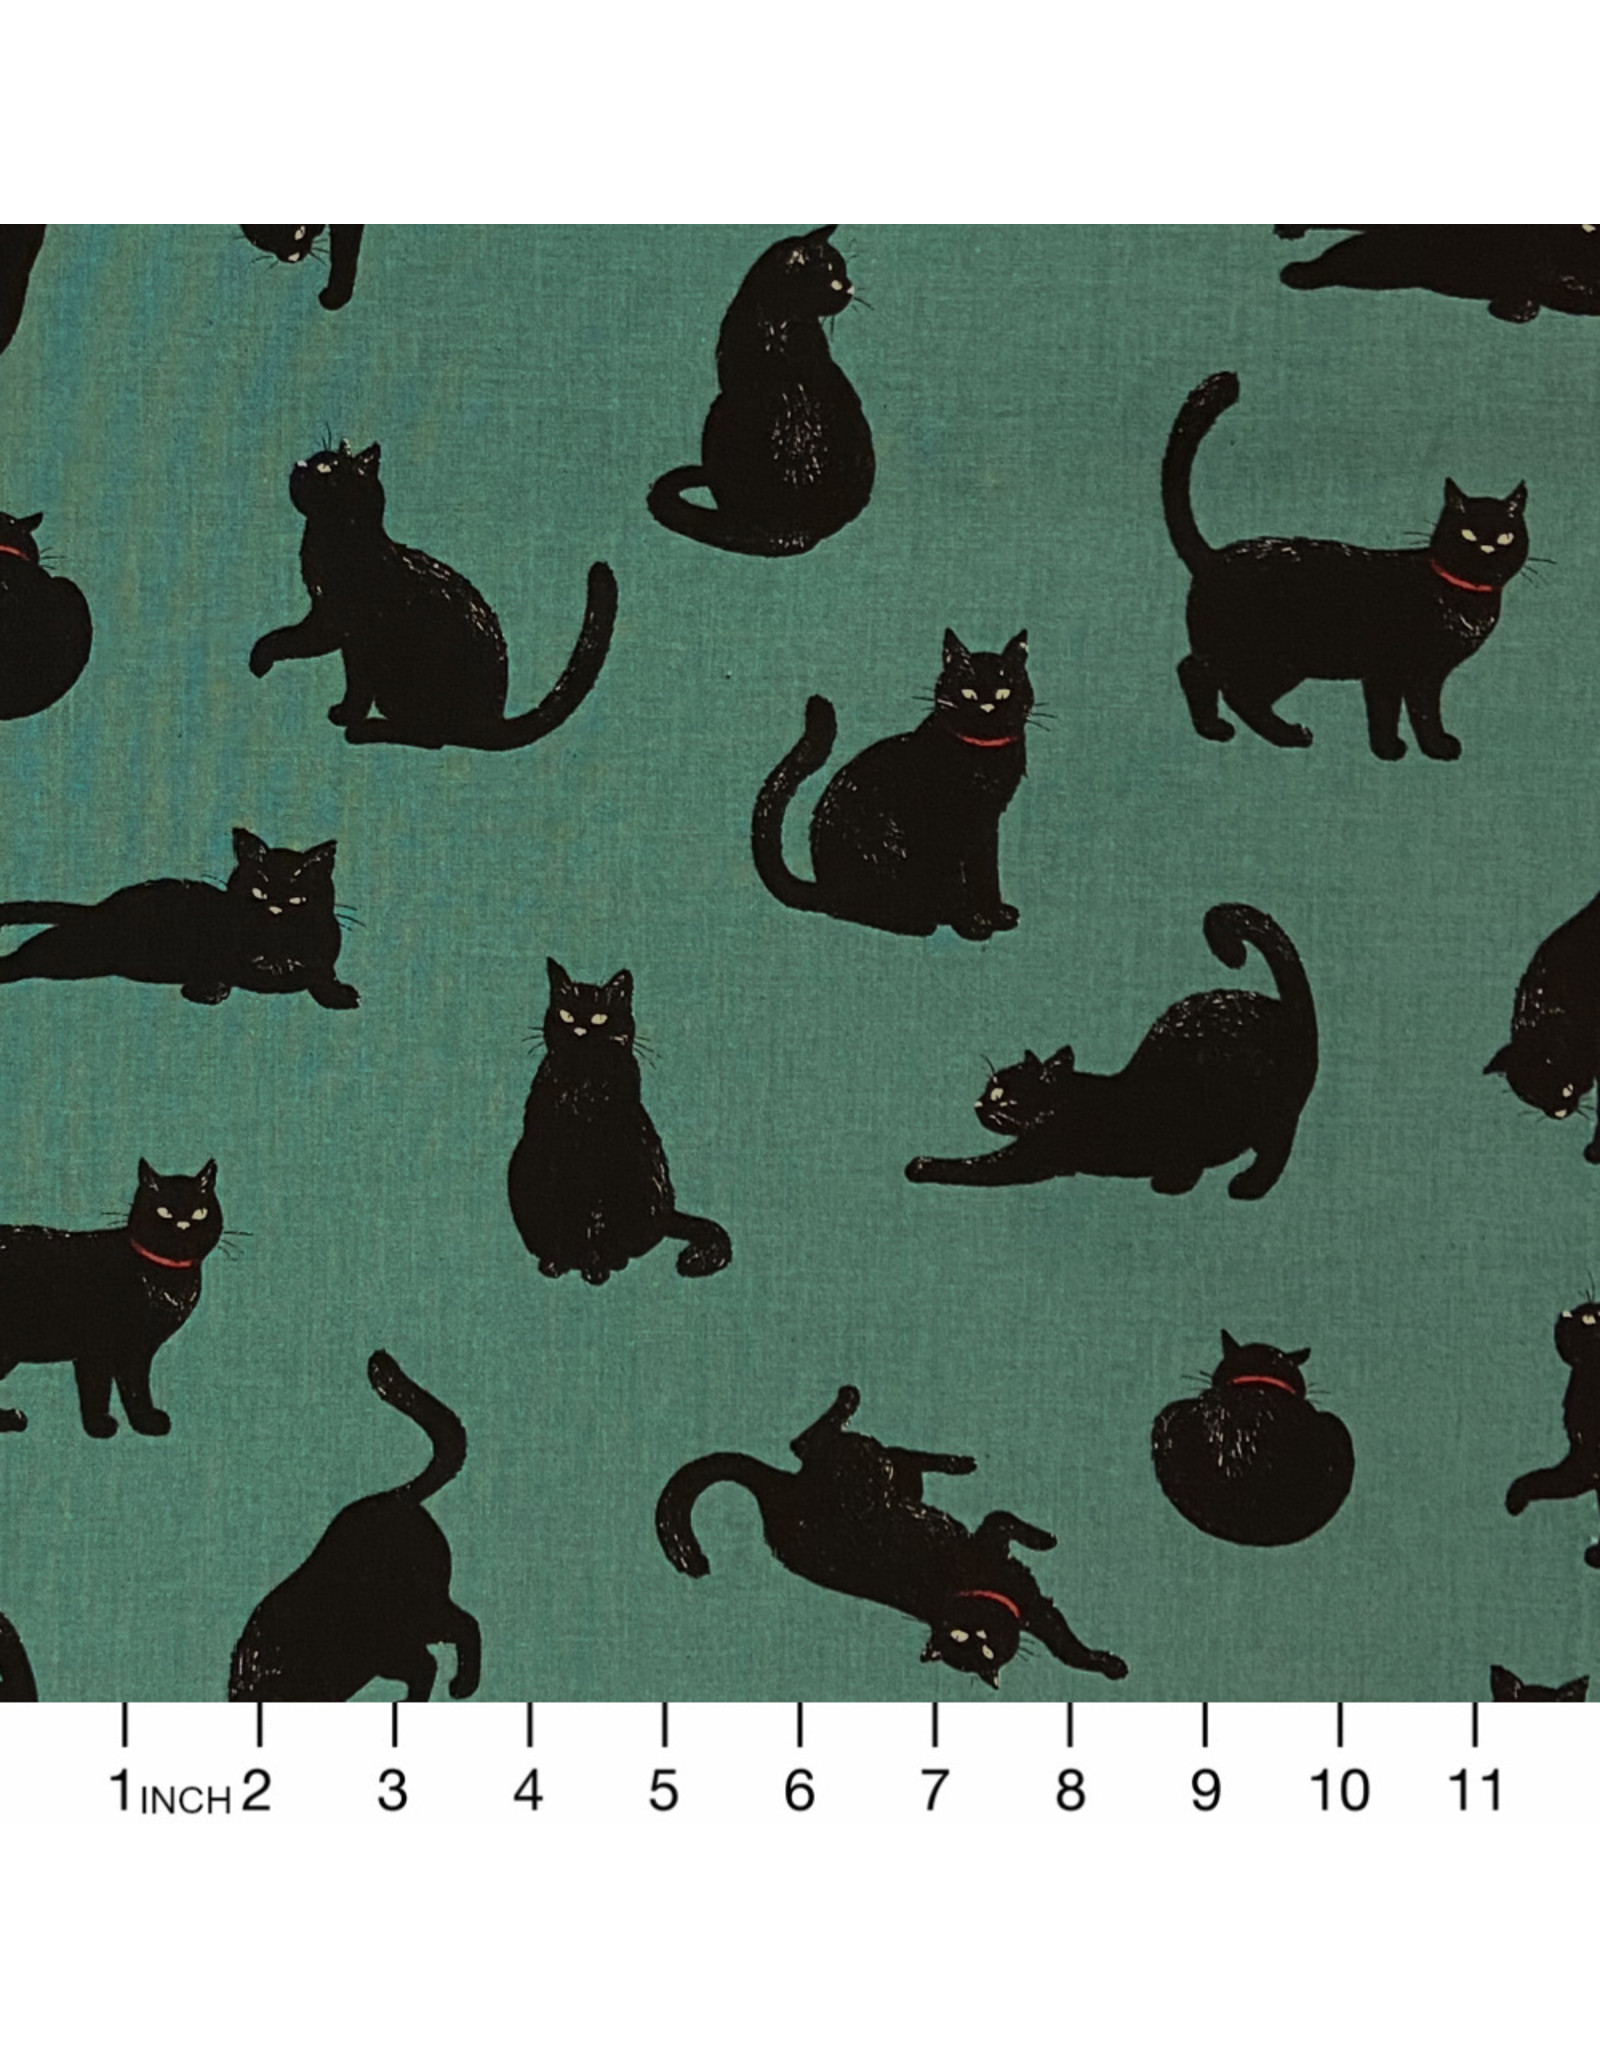 Cosmo, Japan Cosmo Japan, Black Cats on Green, Fabric Half-Yards